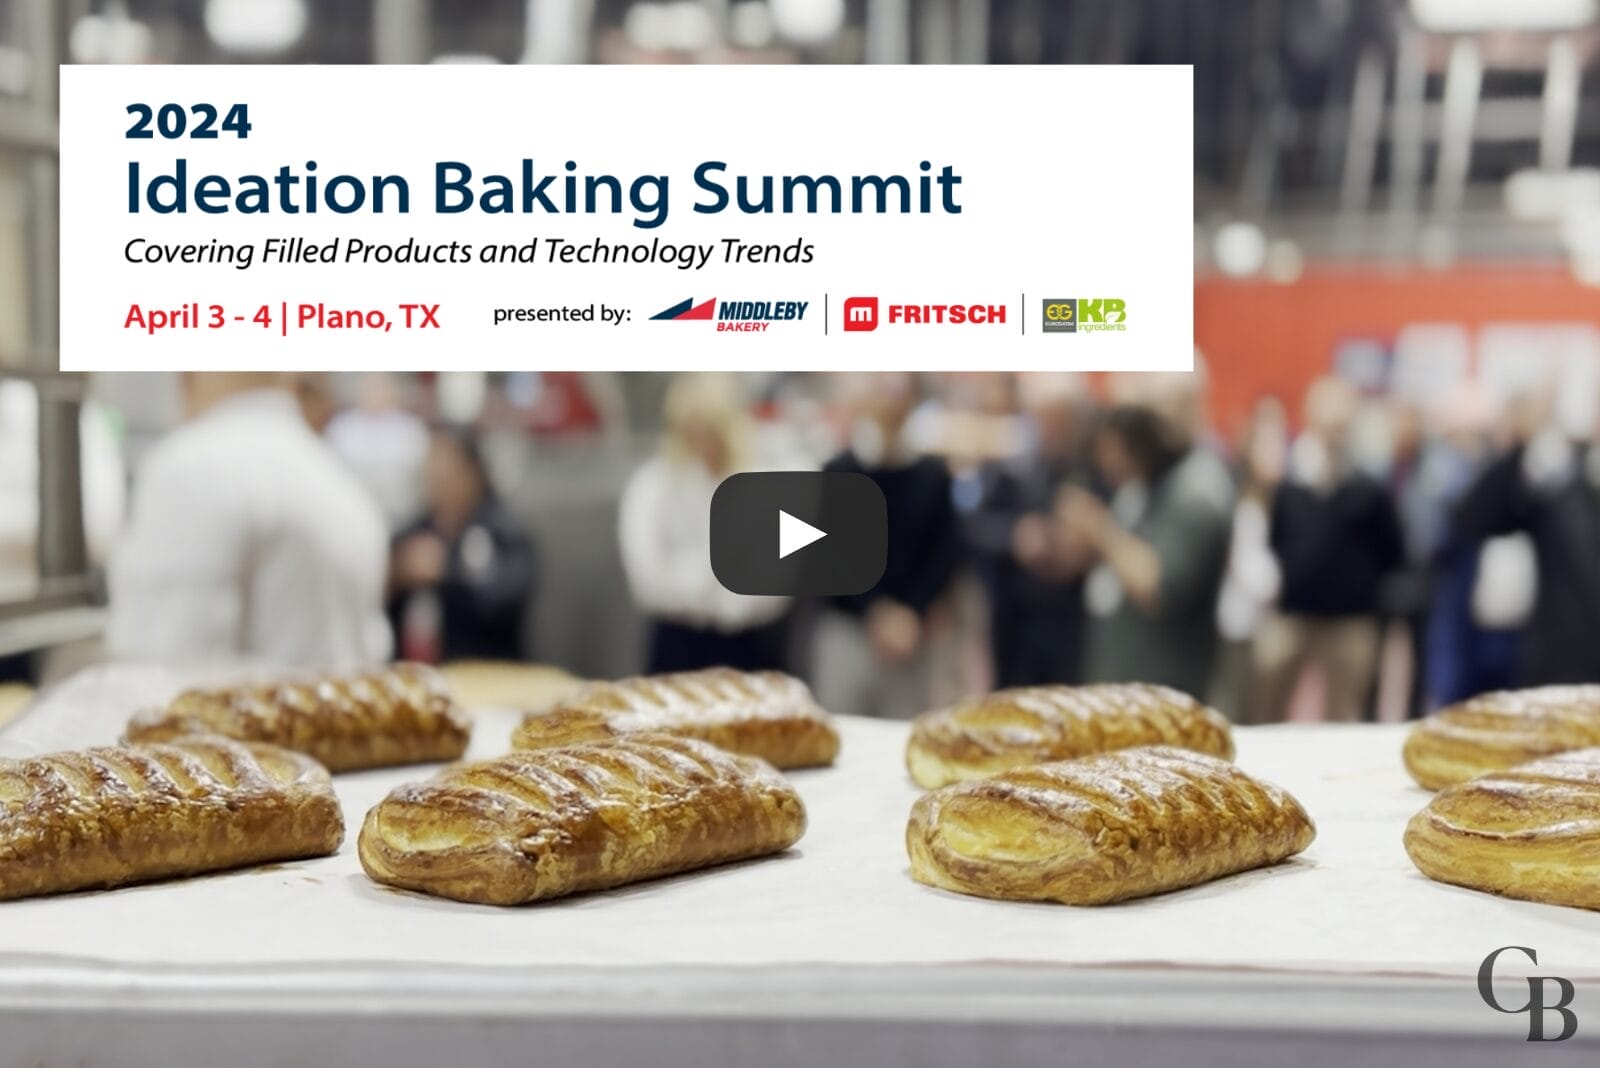 Fresh-baked pastries featured at the Ideation Baking Summit.